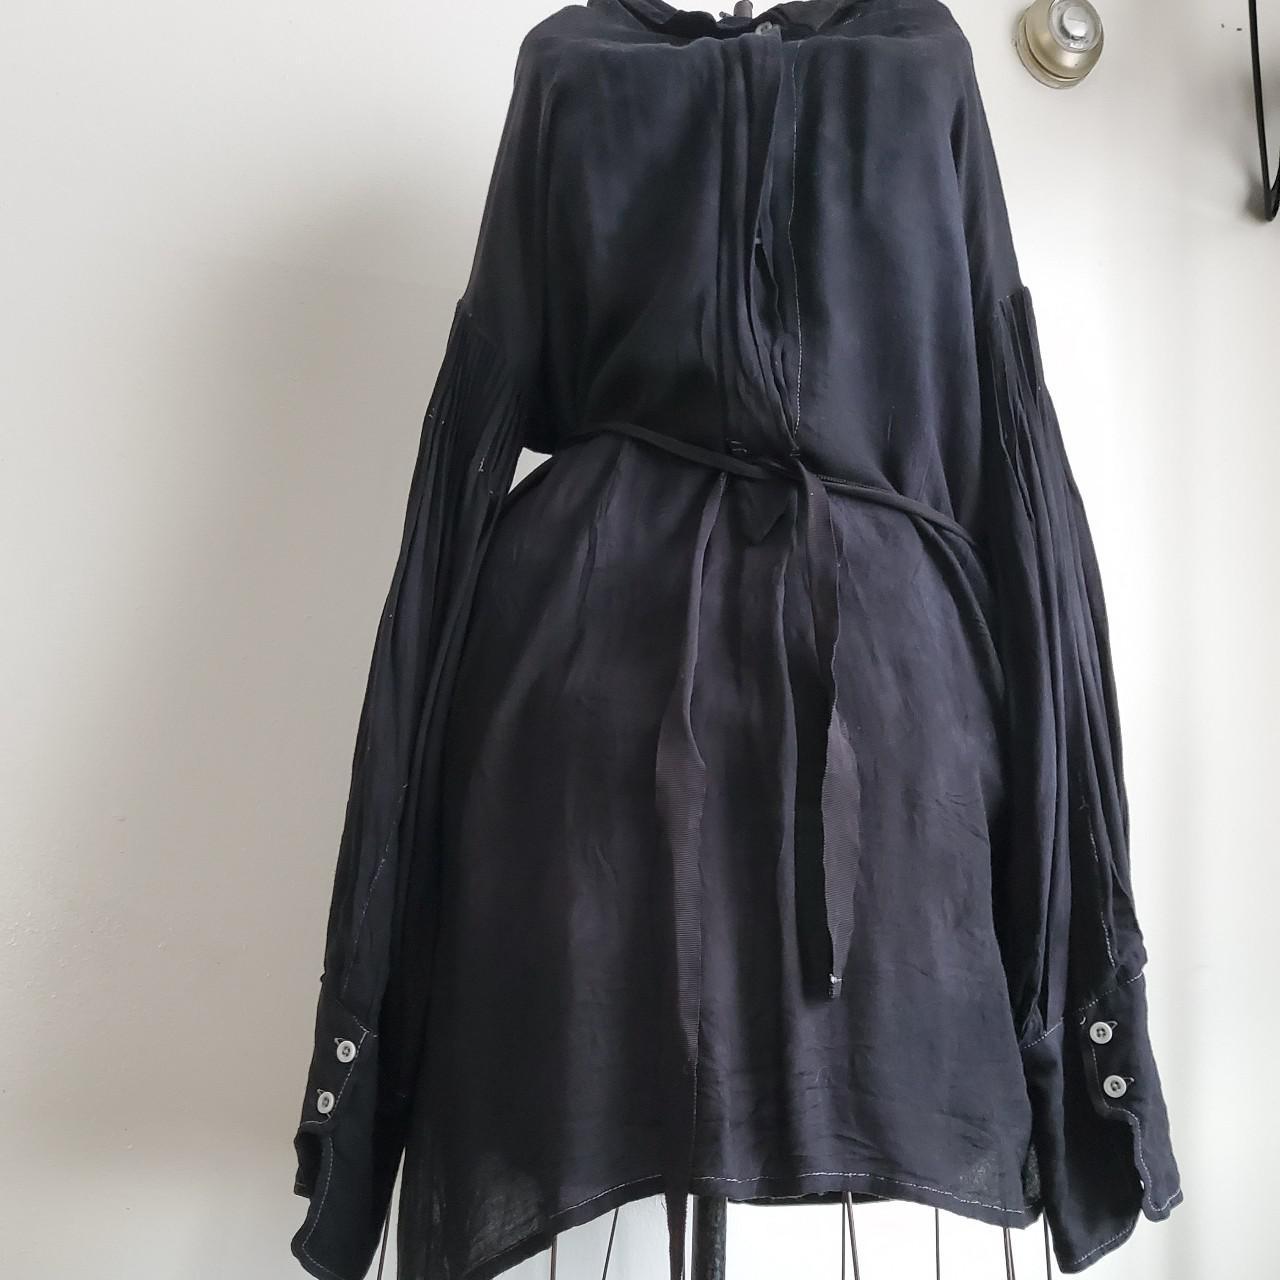 Product Image 1 - Ann demeulemeester tunic dress with